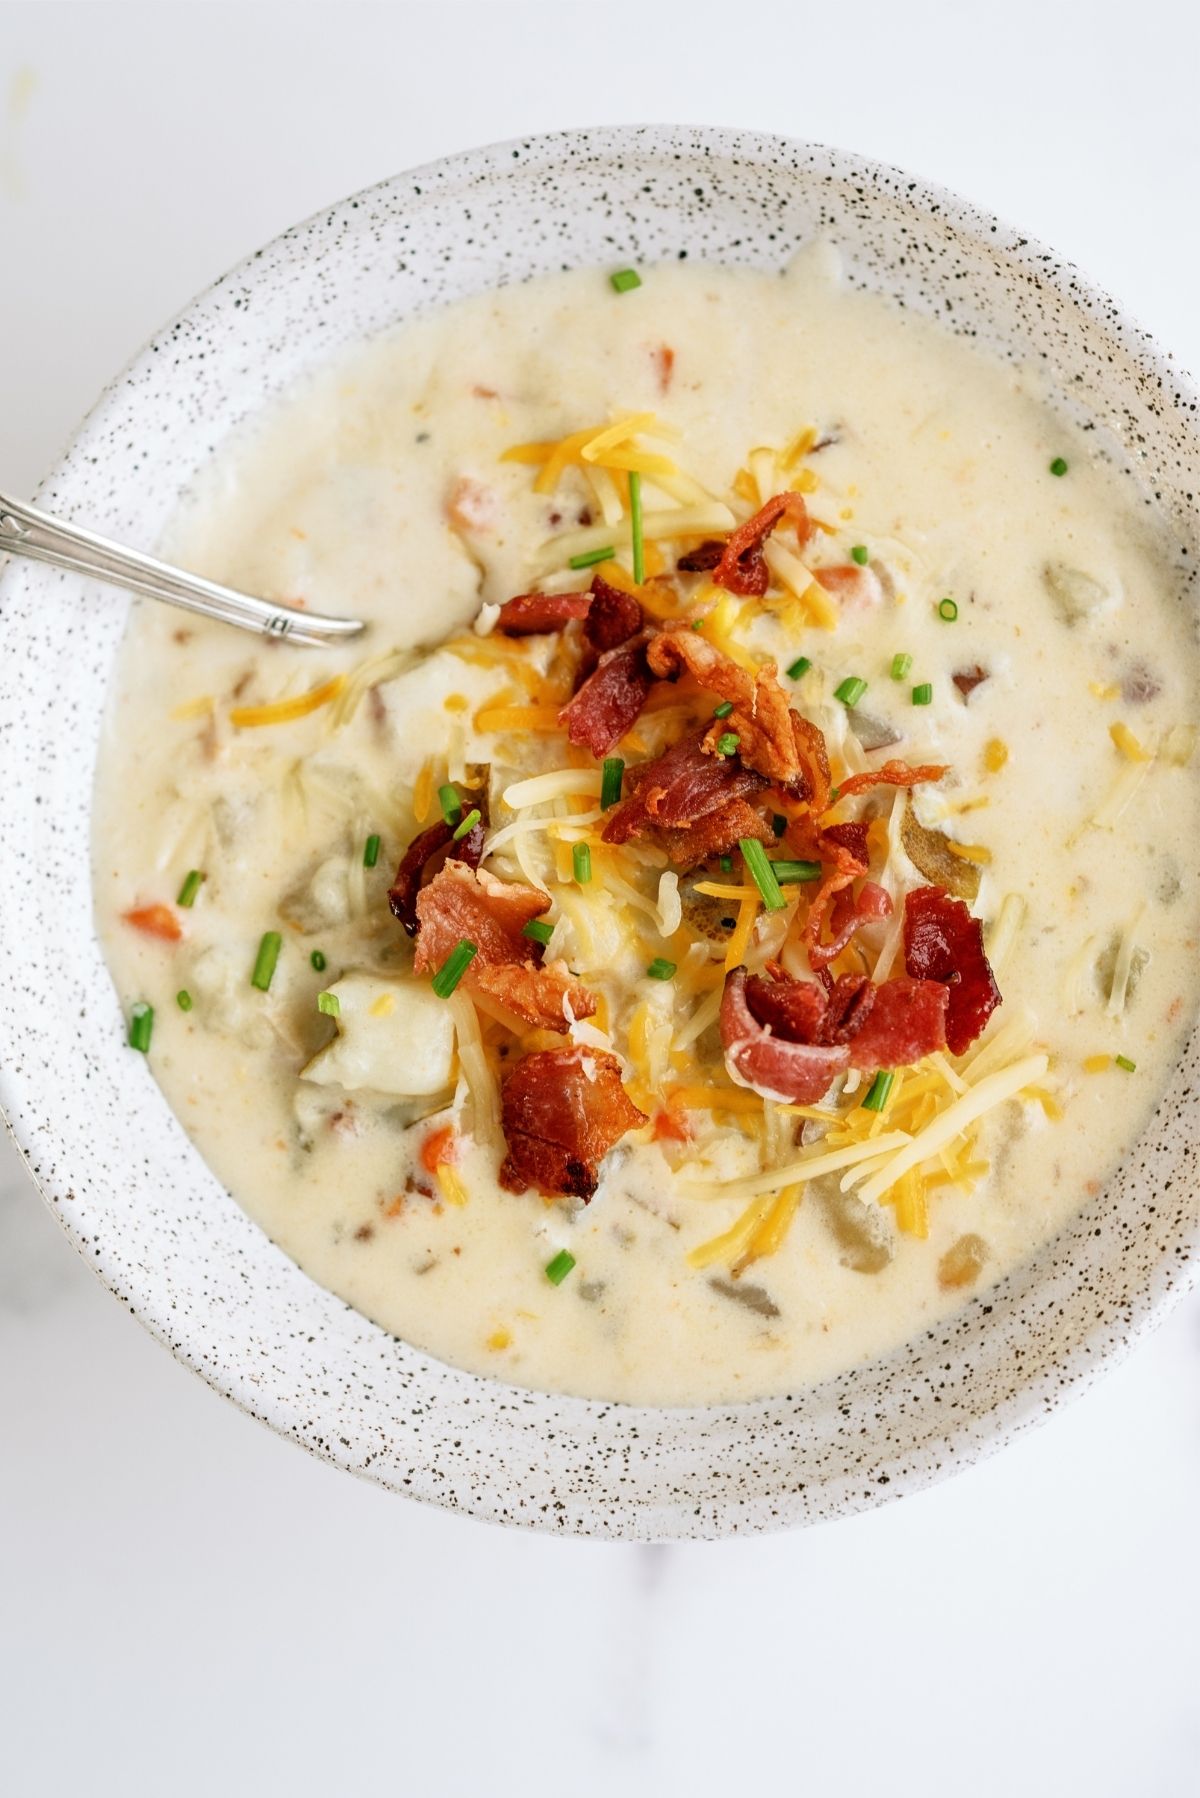 Disneyland’s Loaded Potato Soup in a bowl with toppings